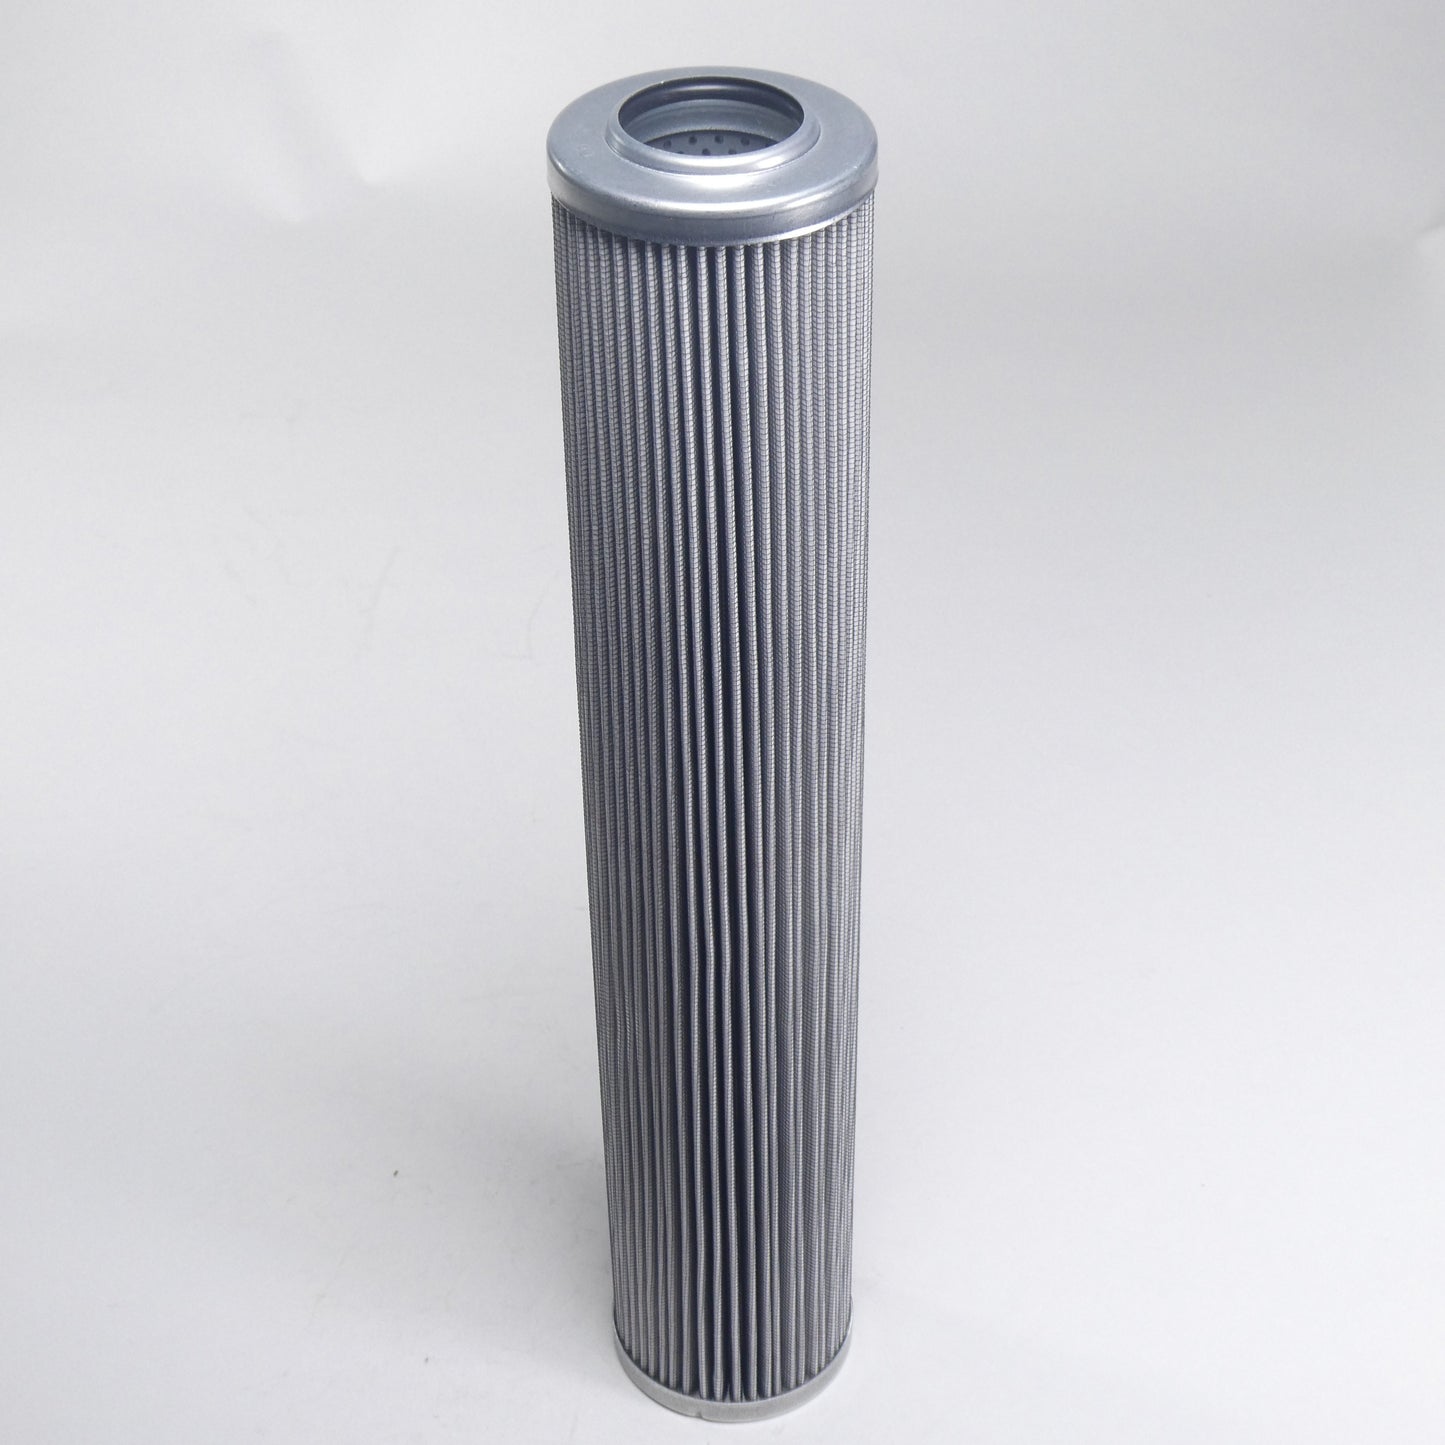 Hydrafil Replacement Filter Element for Hilco 3830-16-061-C